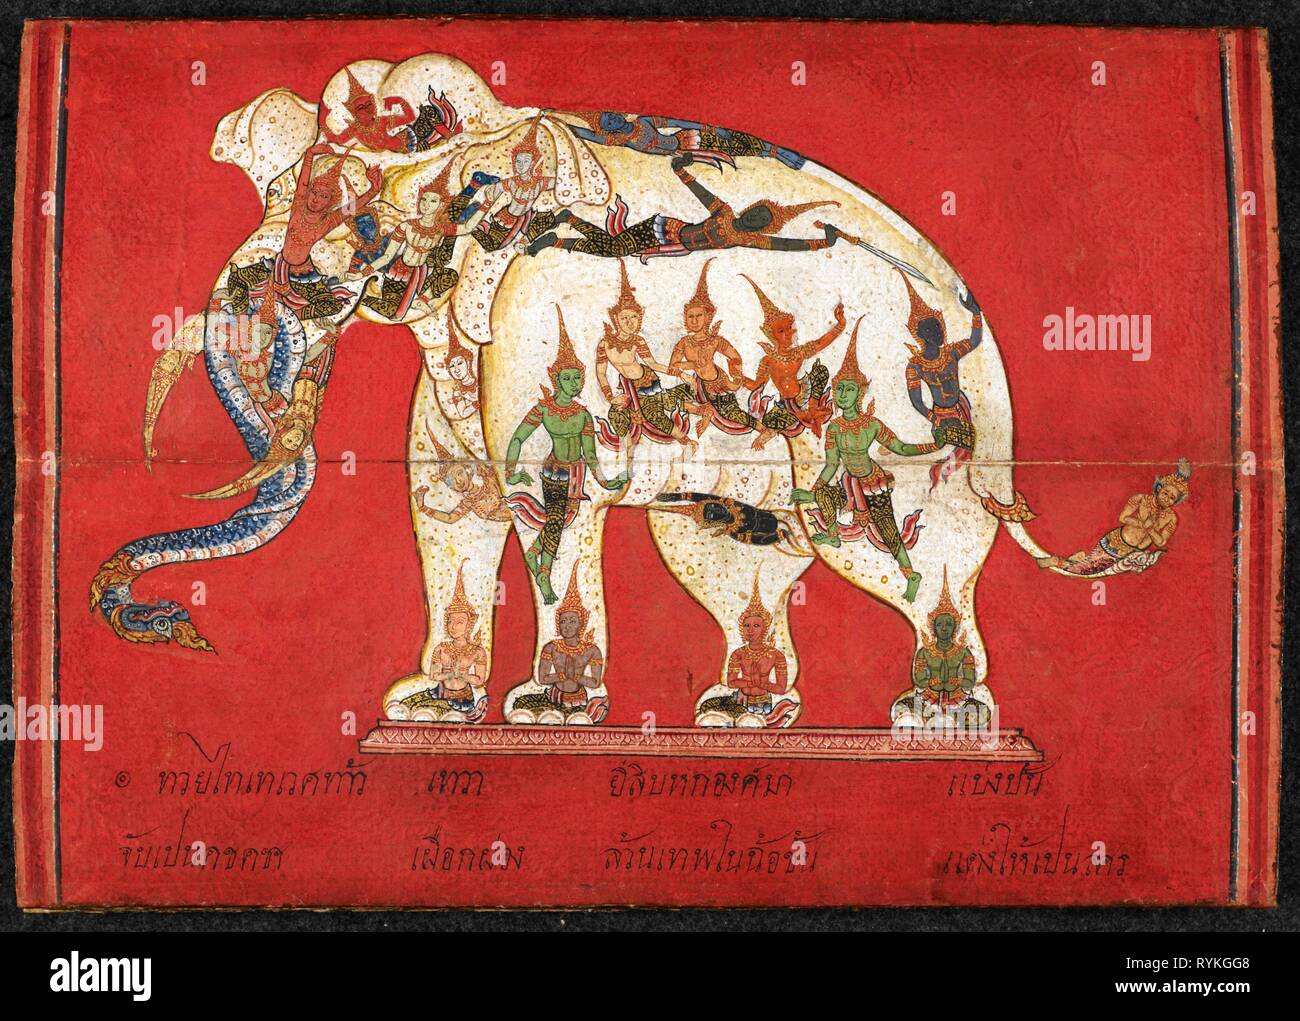 A white elephant painted against a red background. It incorporates numerous moving and seated human figures. Elephant treatise. c.1830. Source: Or. 13652, f.6. Language: Thai. Stock Photo